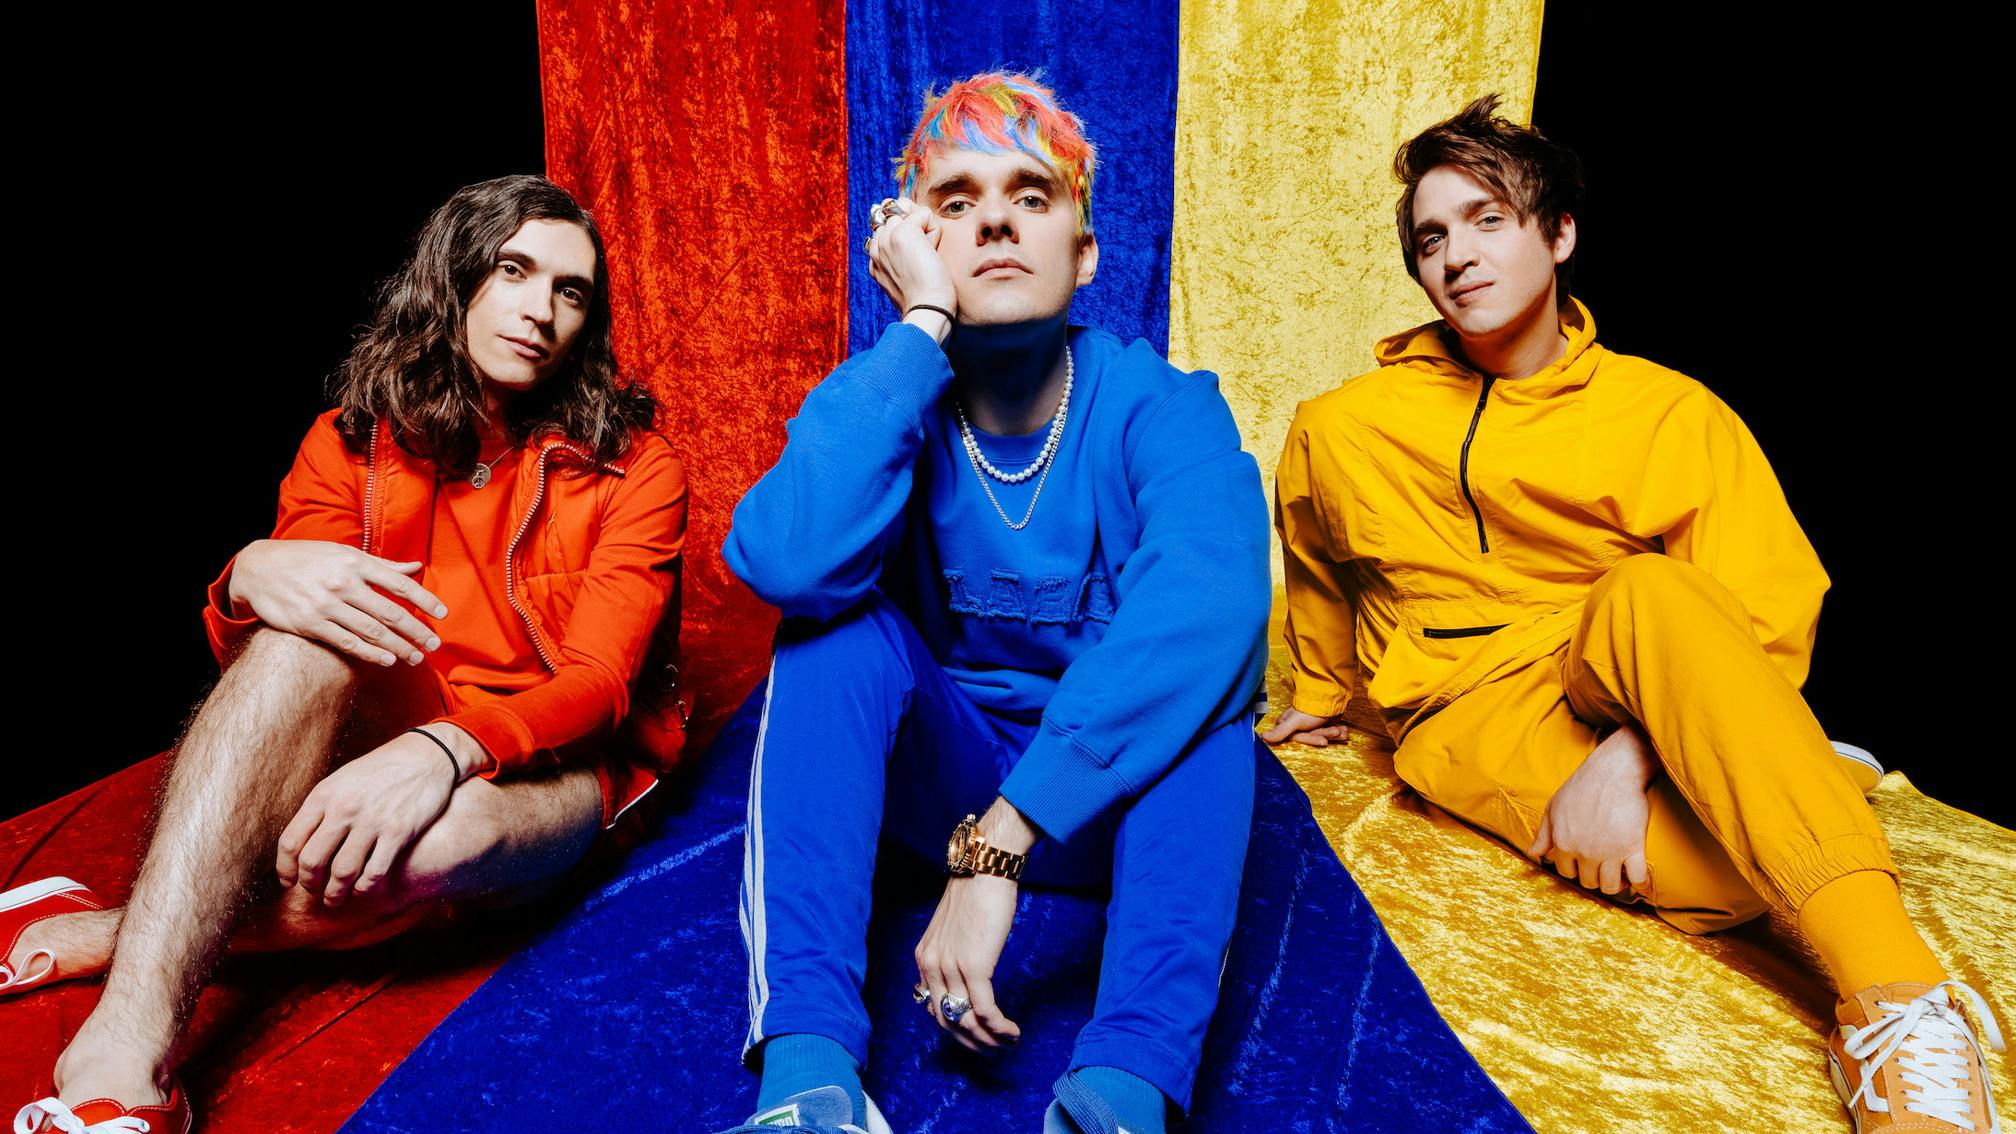 Waterparks officially change song title to match fan's tattoo typo